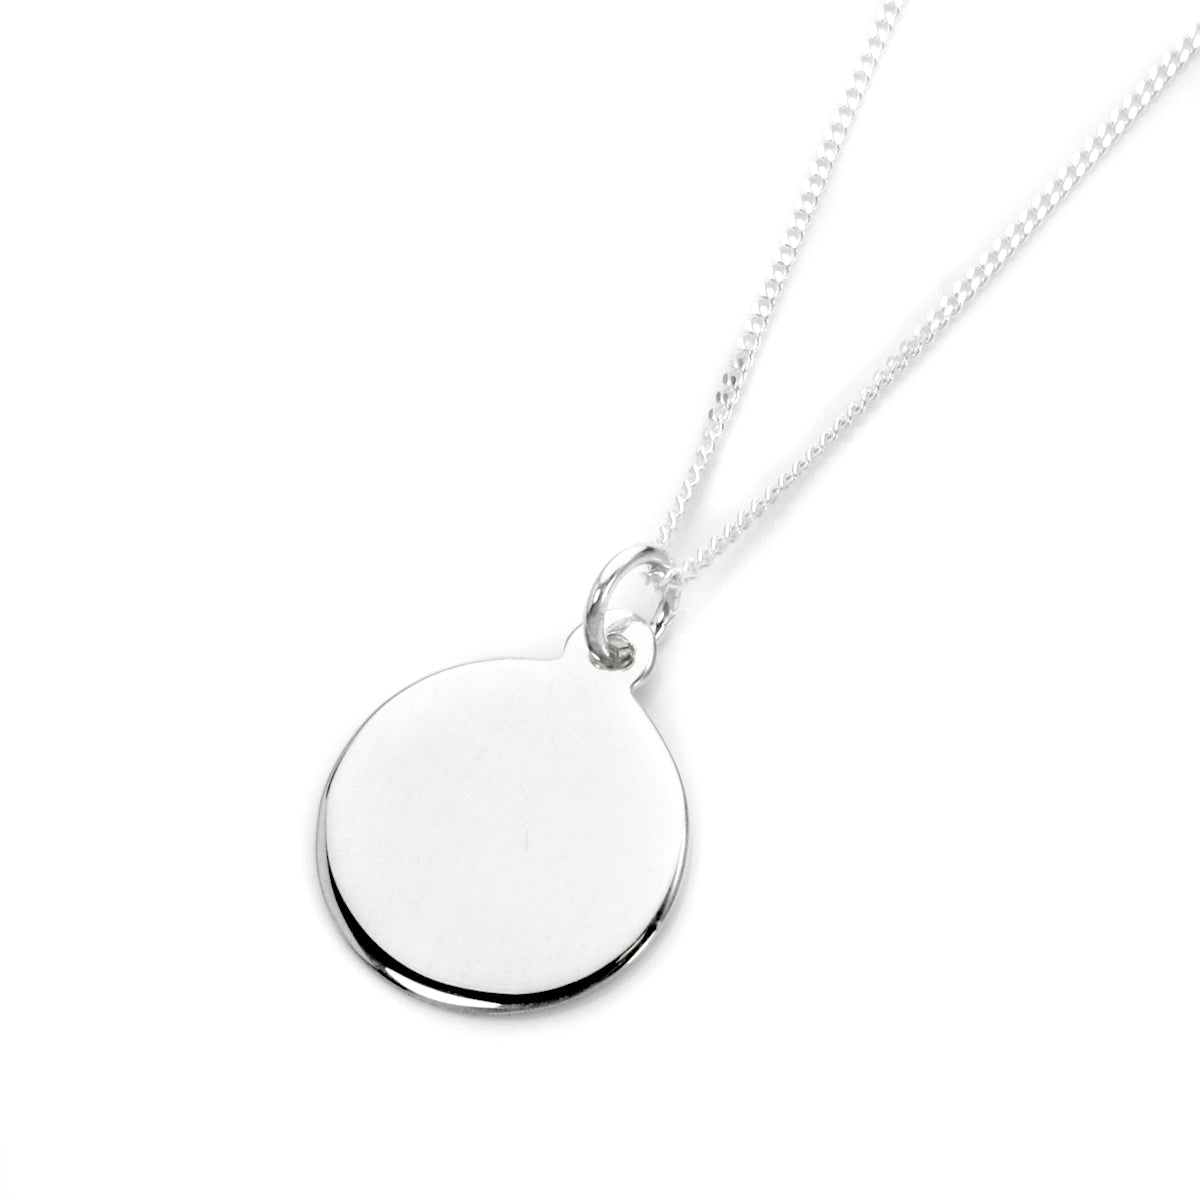 Sterling Silver Engravable Round Pendant Necklace 14 - 32 Inches